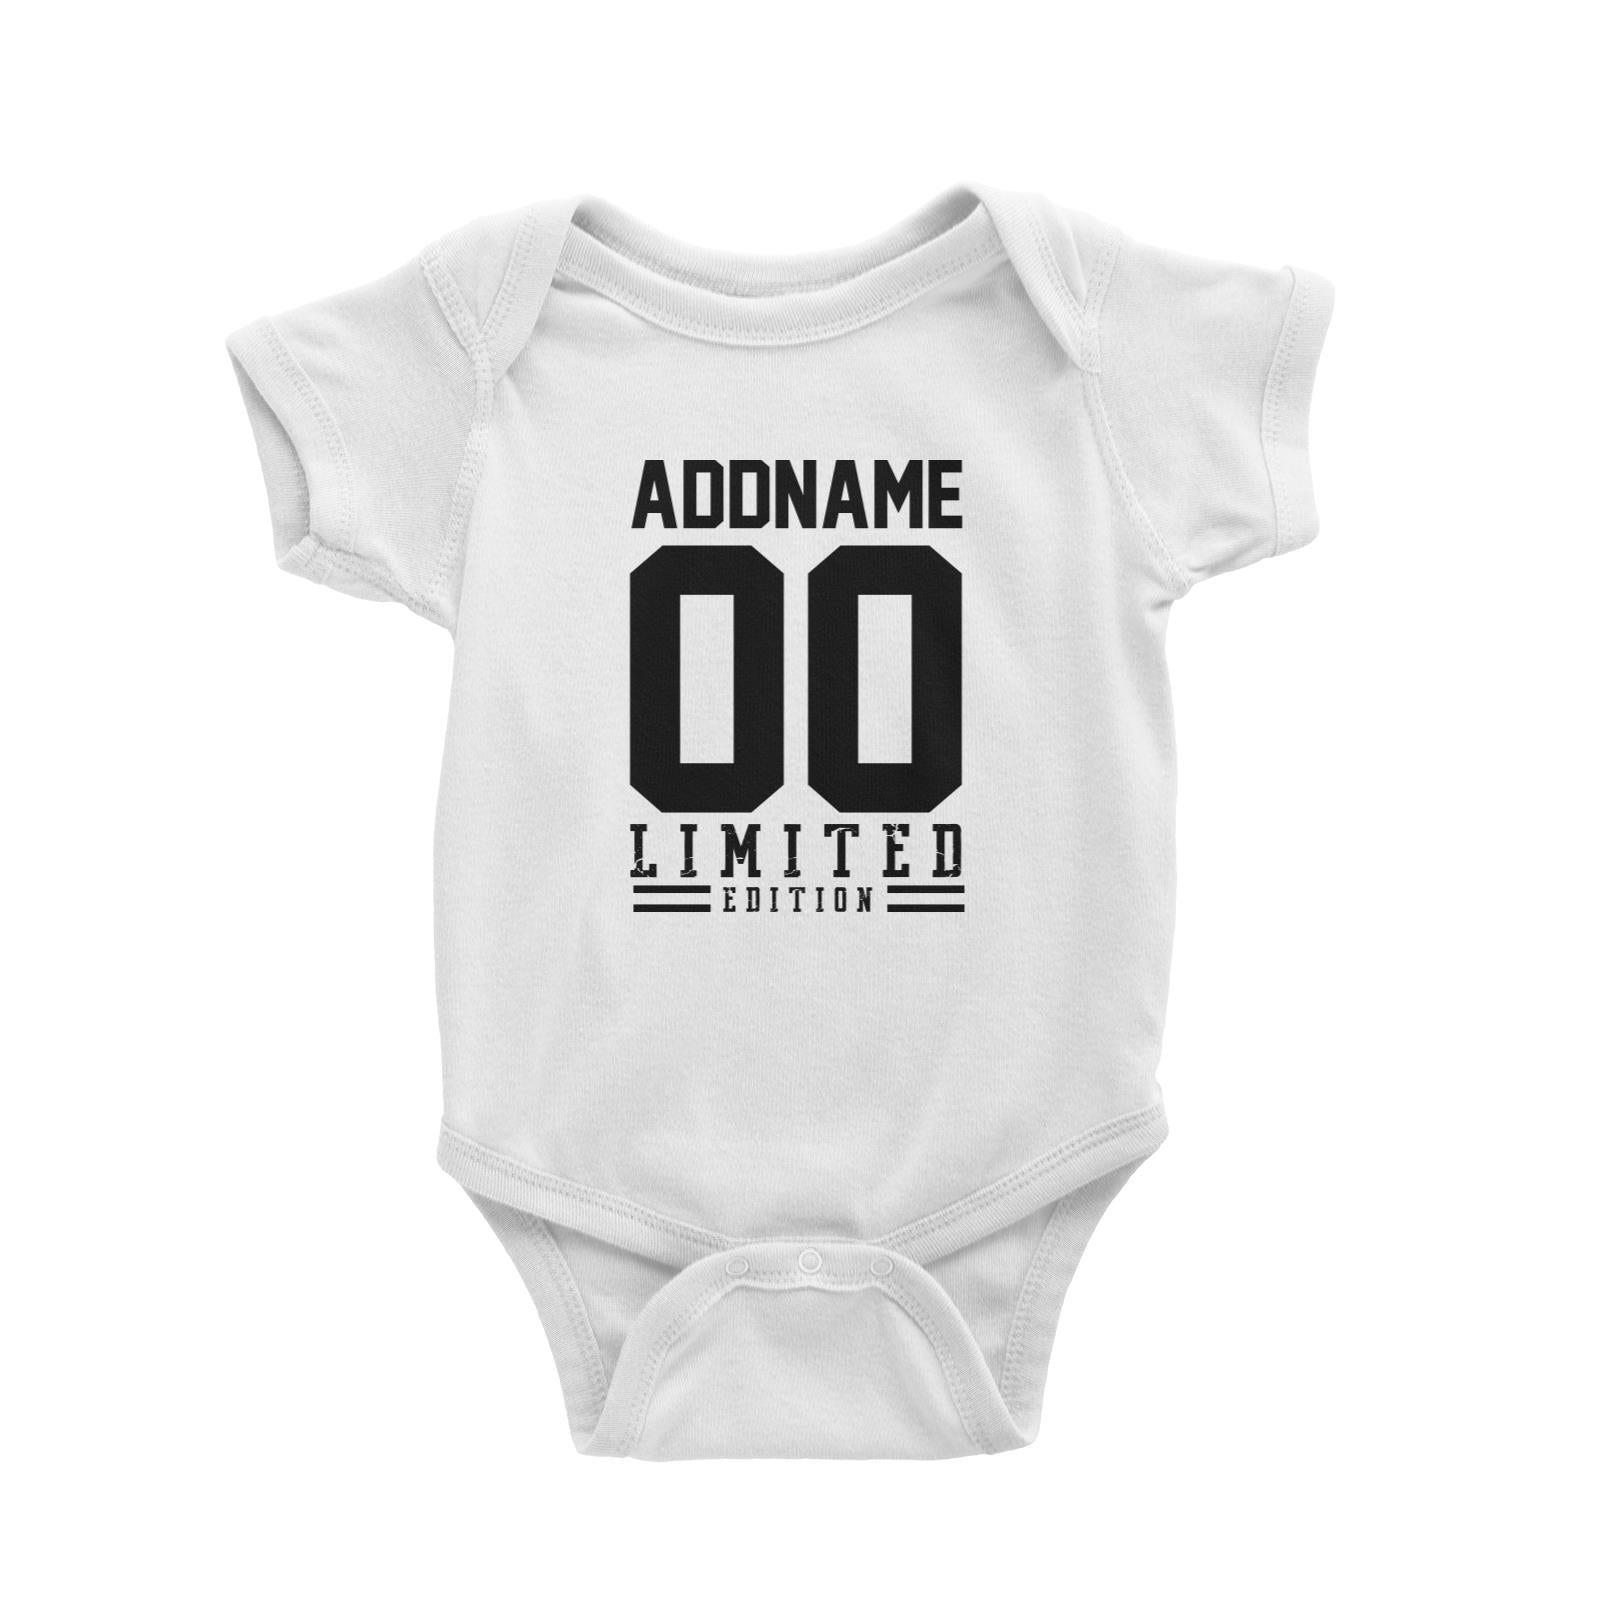 Limited Edition Jersey Personalizable with Name and Number Baby Romper